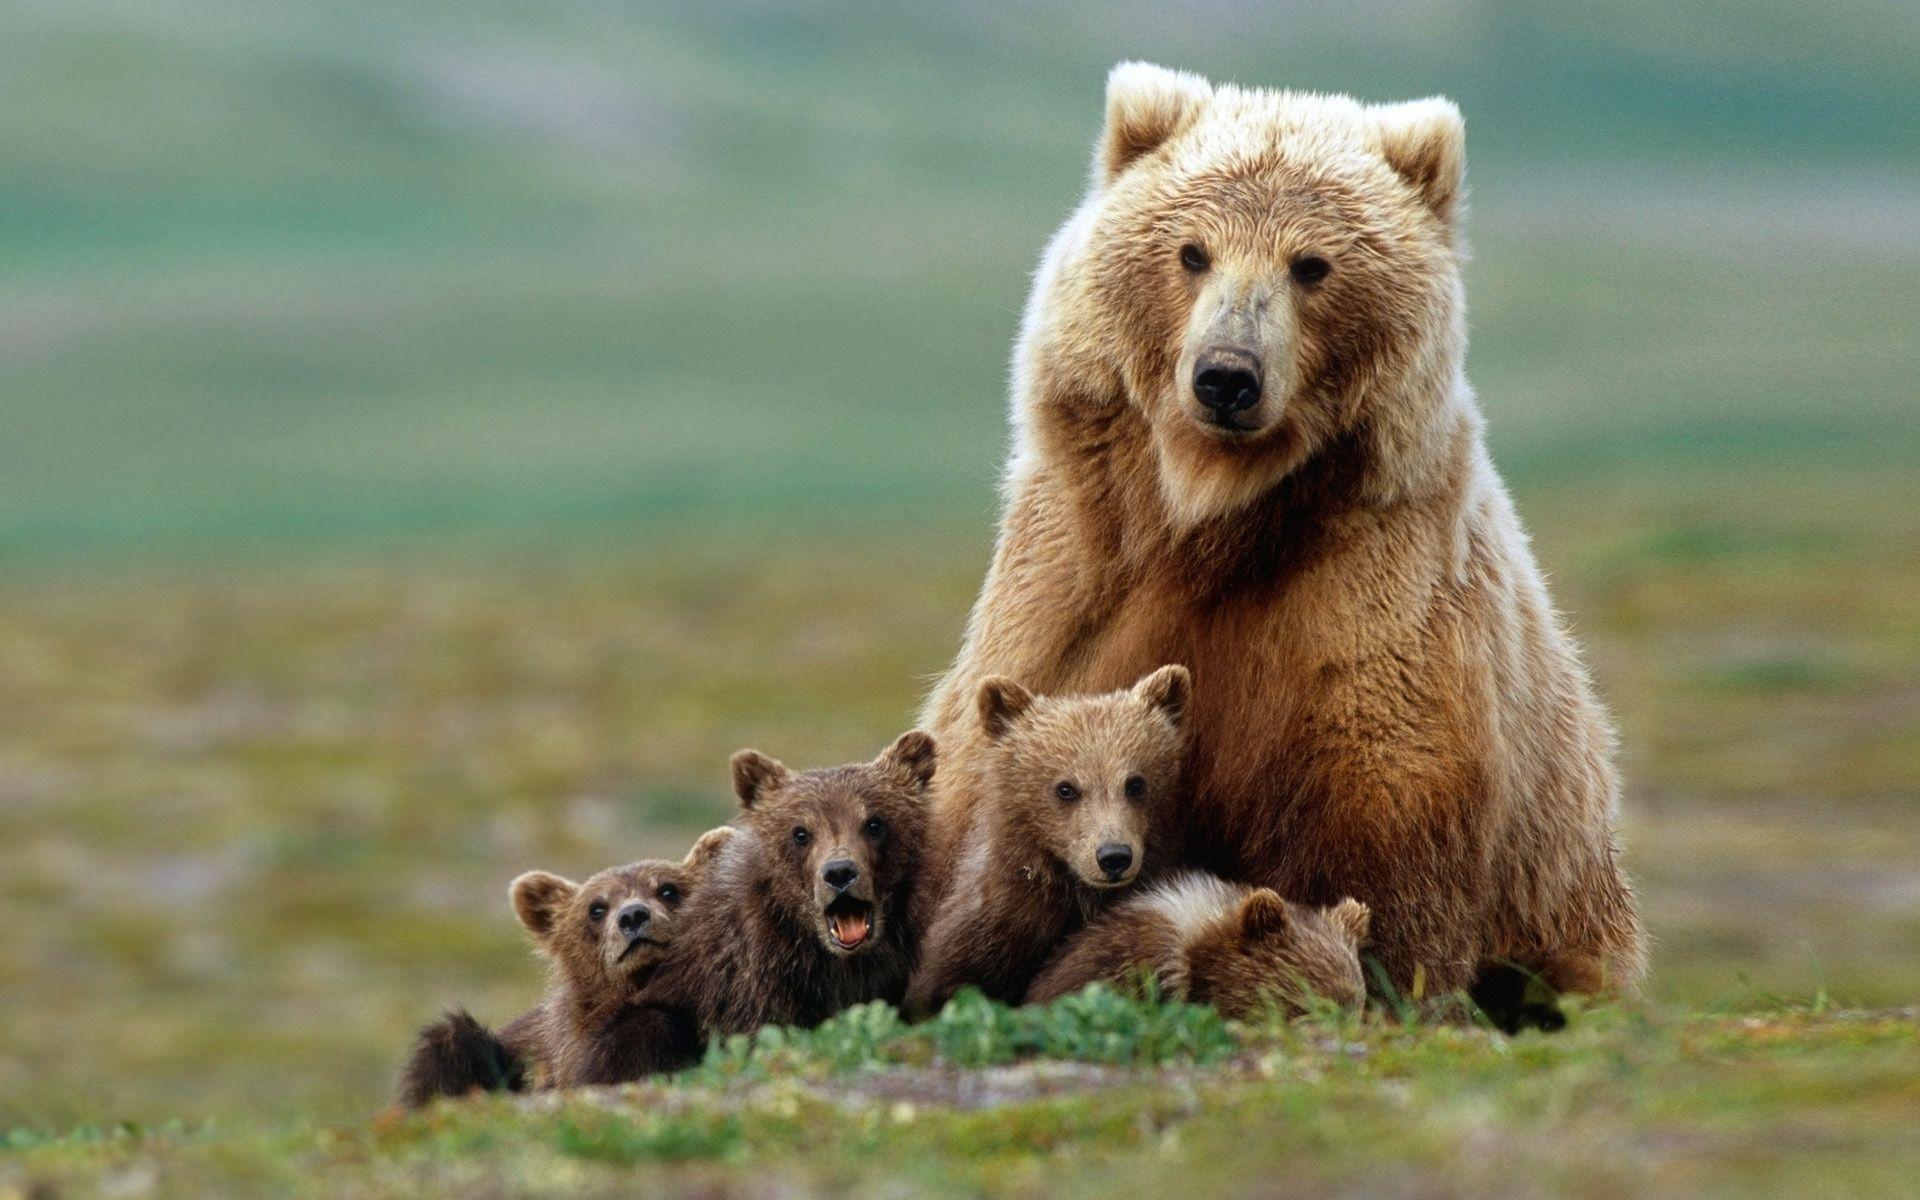 Baby Grizzly Bears